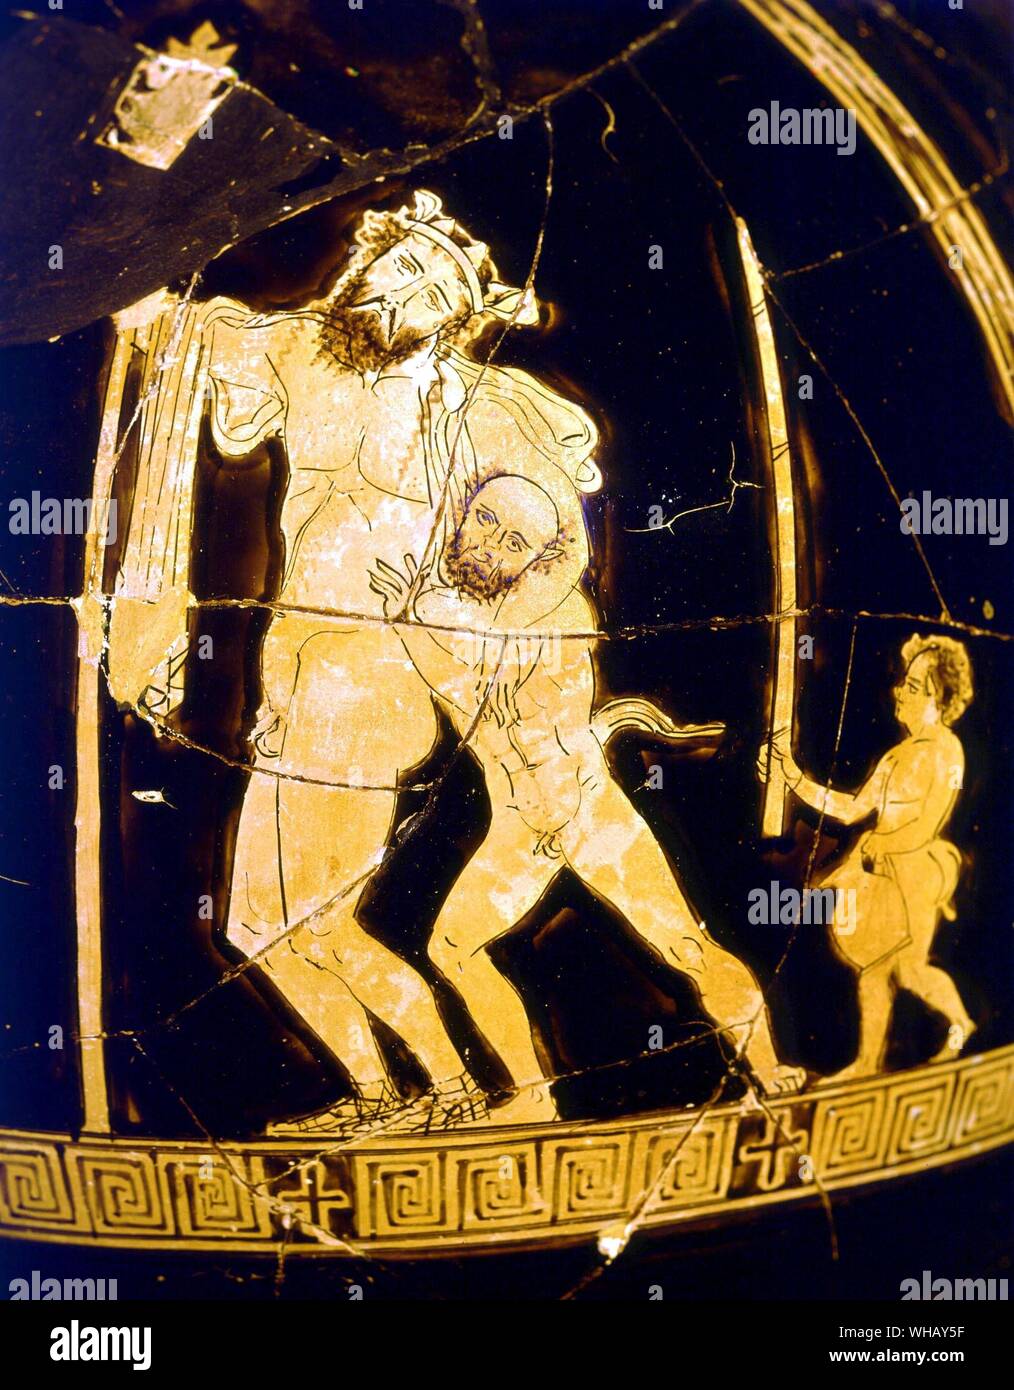 Dionysian vase late 5th century BC. Dionysus simply drunk.  Men of Athens by Rex Warner, page 185. Stock Photo